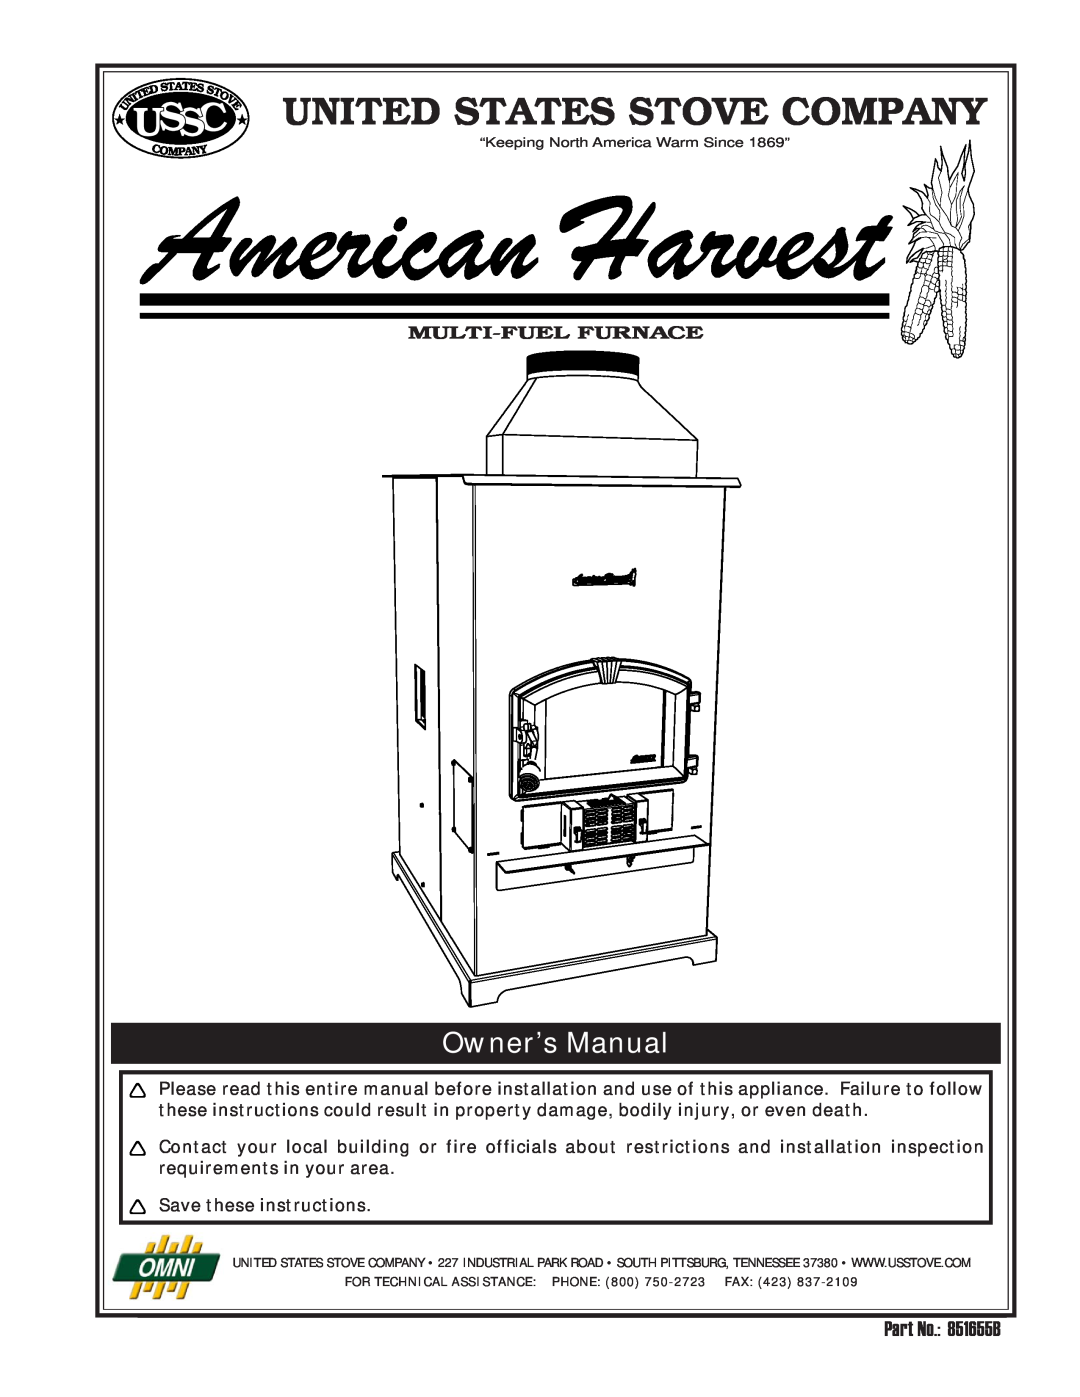 United States Stove 6110 owner manual United States Stove Company, Ussc, Part No. 851655B, Multi-Fuelfurnace 